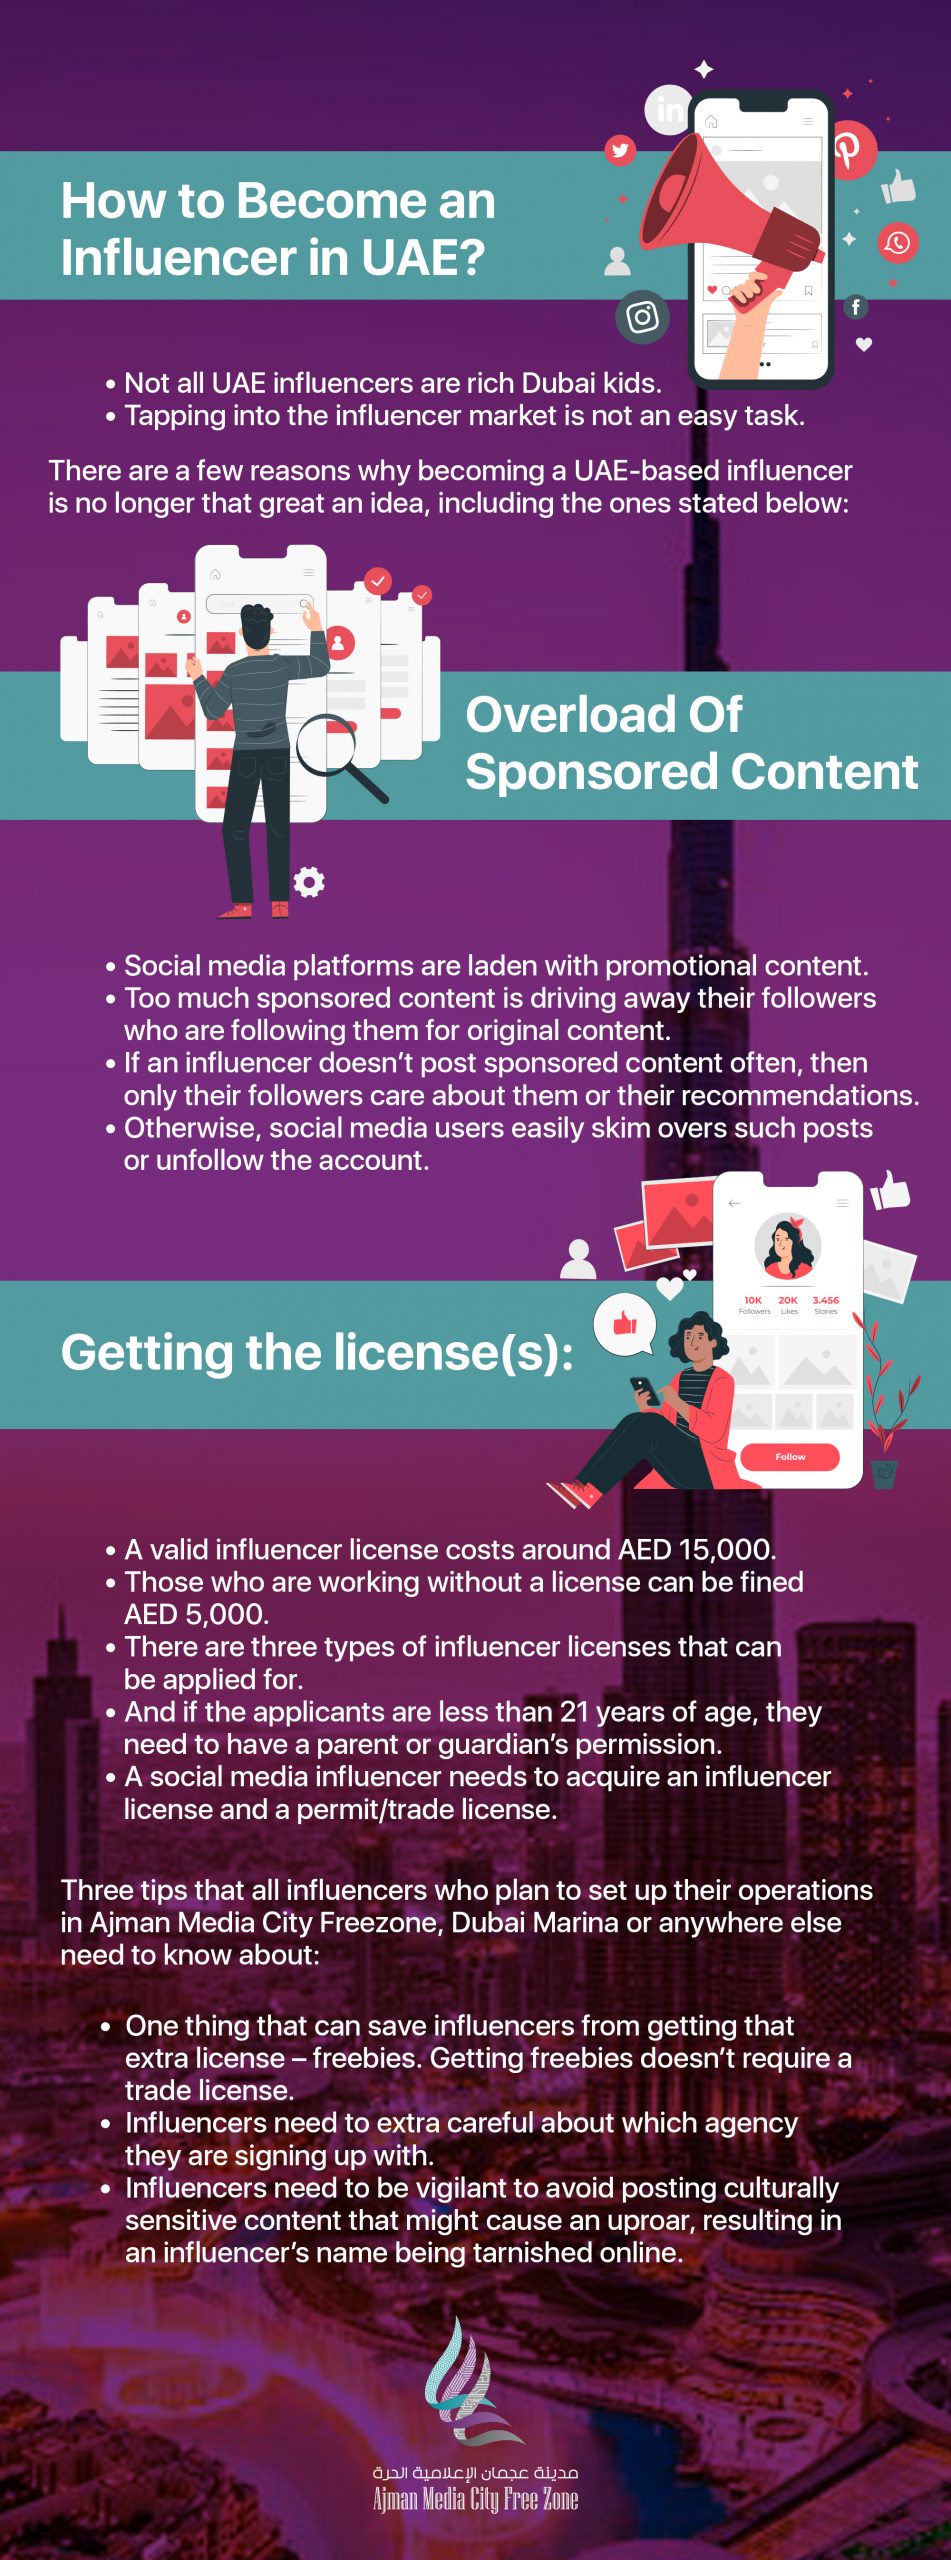 How_to_Become_an_Influencer_in_UAE